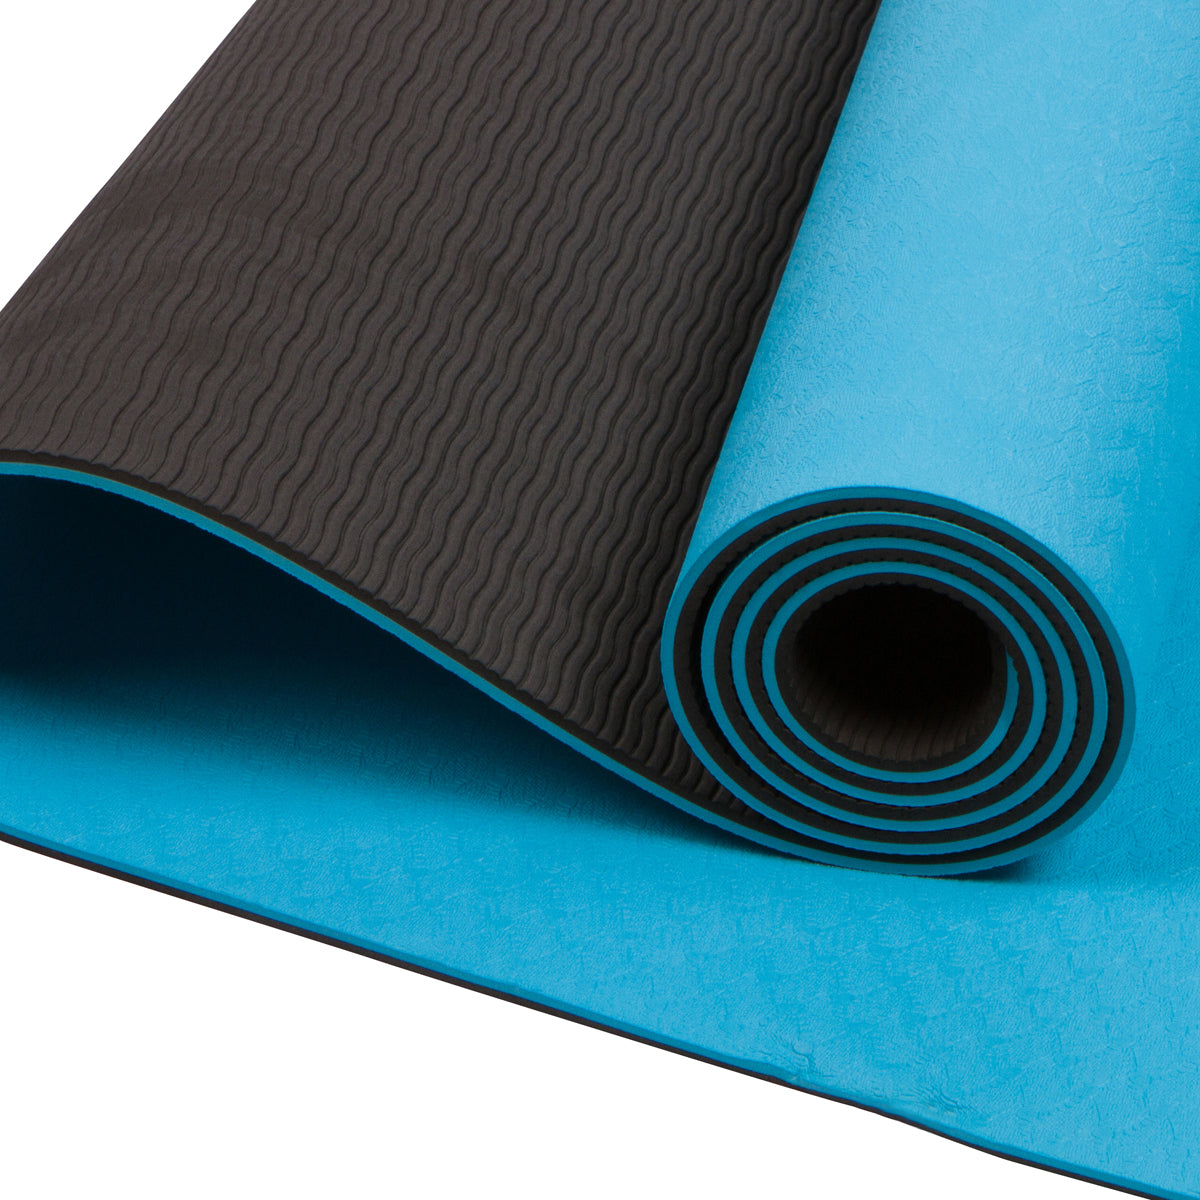 TAOZG TPE Yoga Mat Double Layer Non-Slip with Position Line